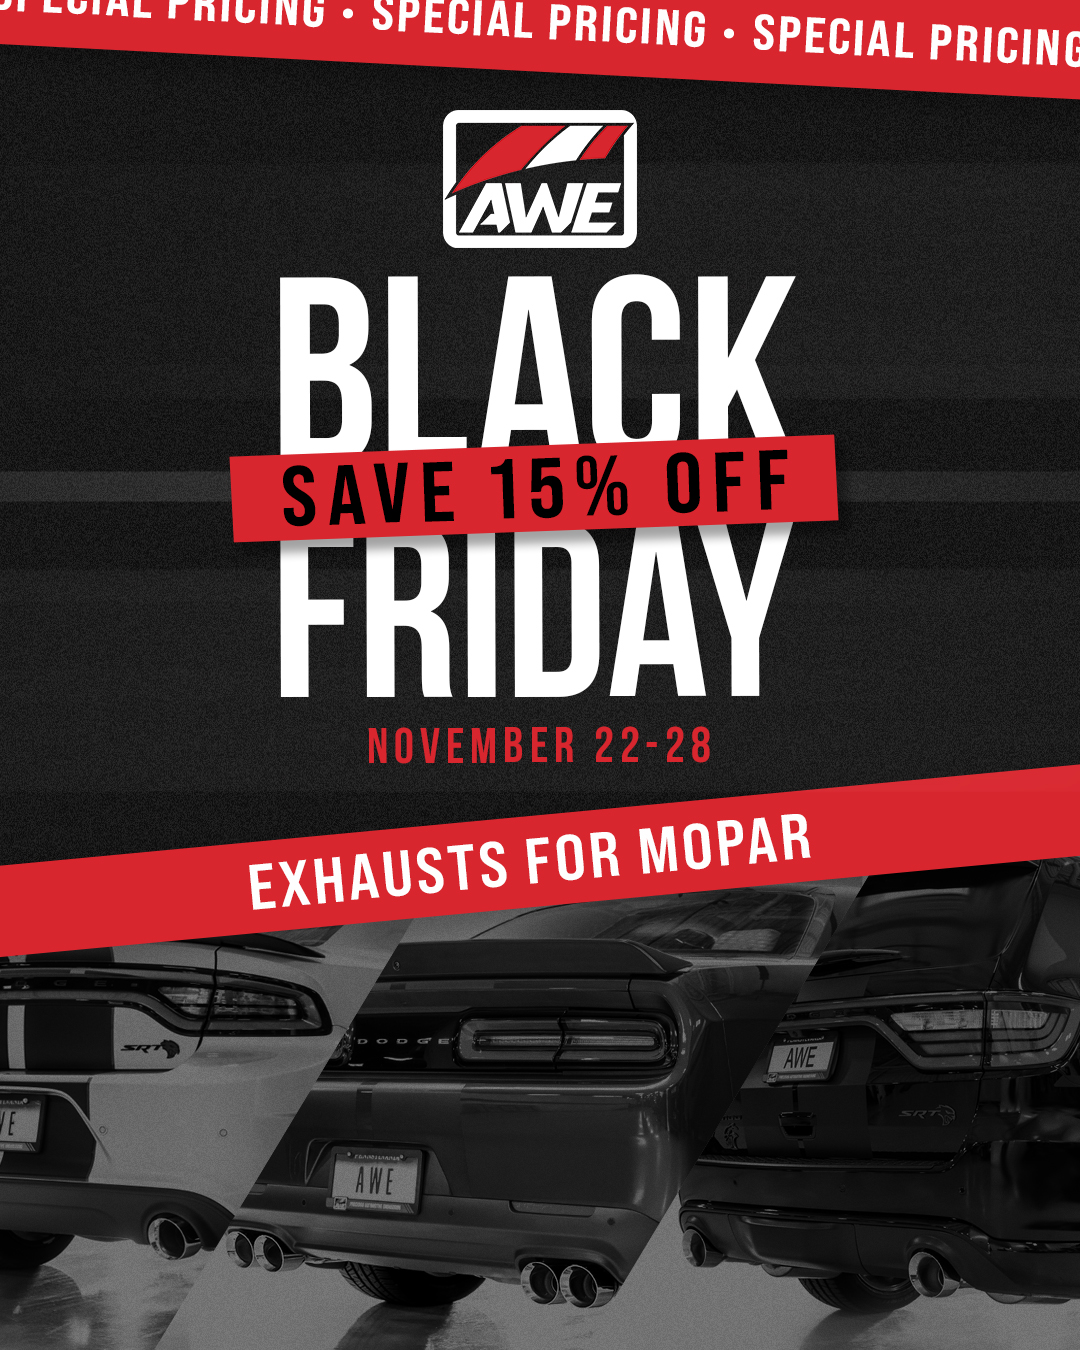 HUGE BLACK FRIDAY SALE on AWE Exhaust Systems @ JustBoltOns.com